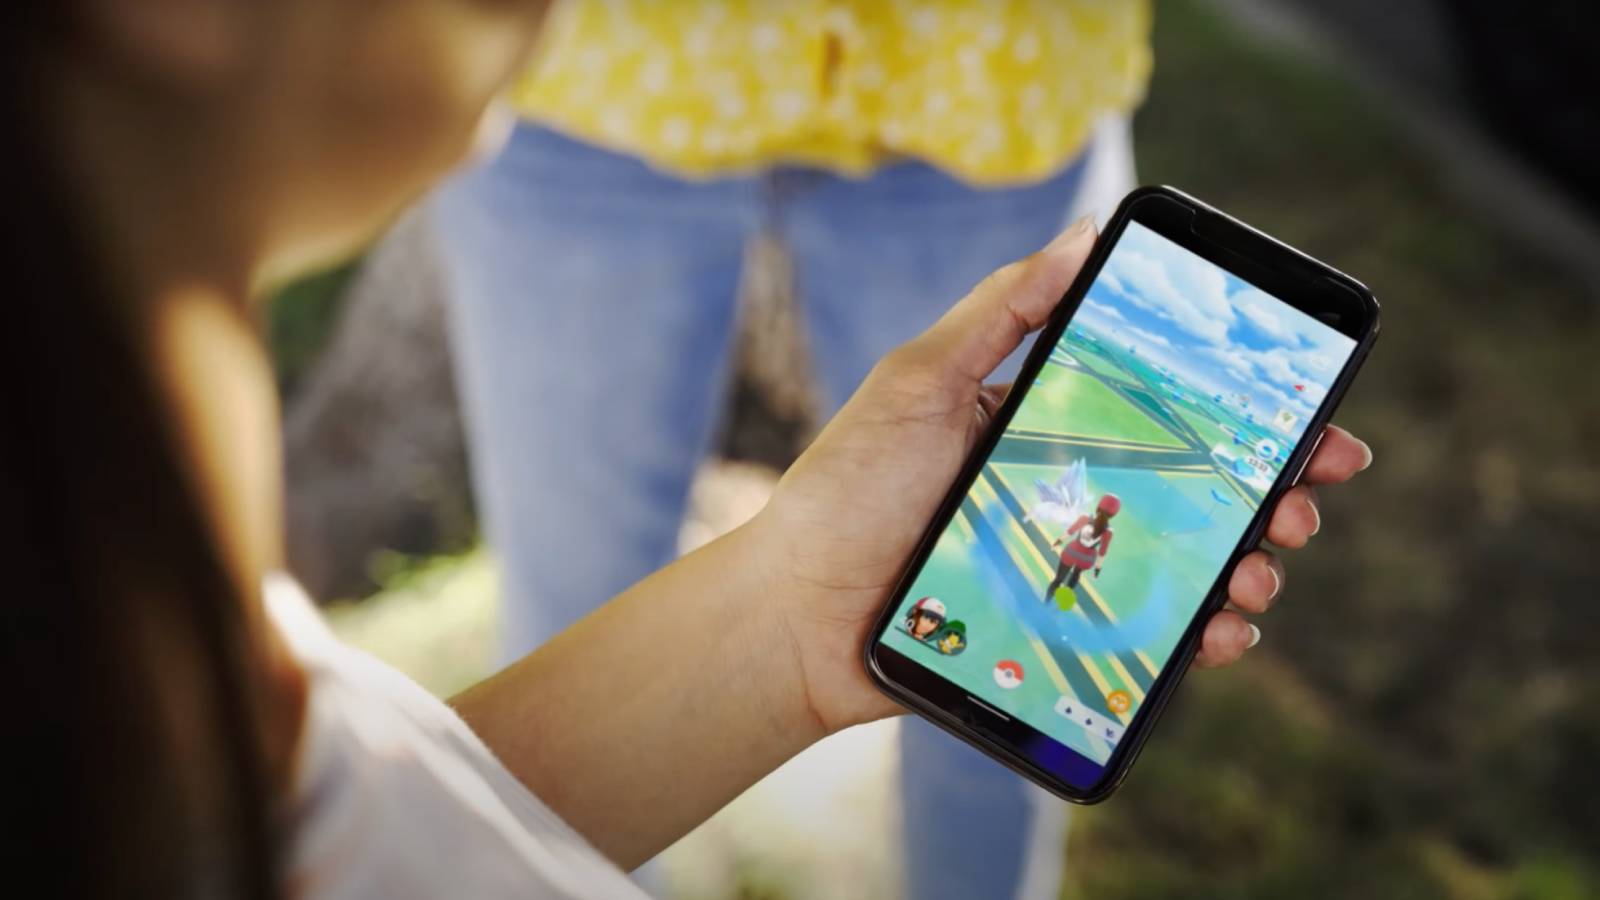 A Pokemon Go trainer holds their phone, with the screen showing the Adventure Incense activated